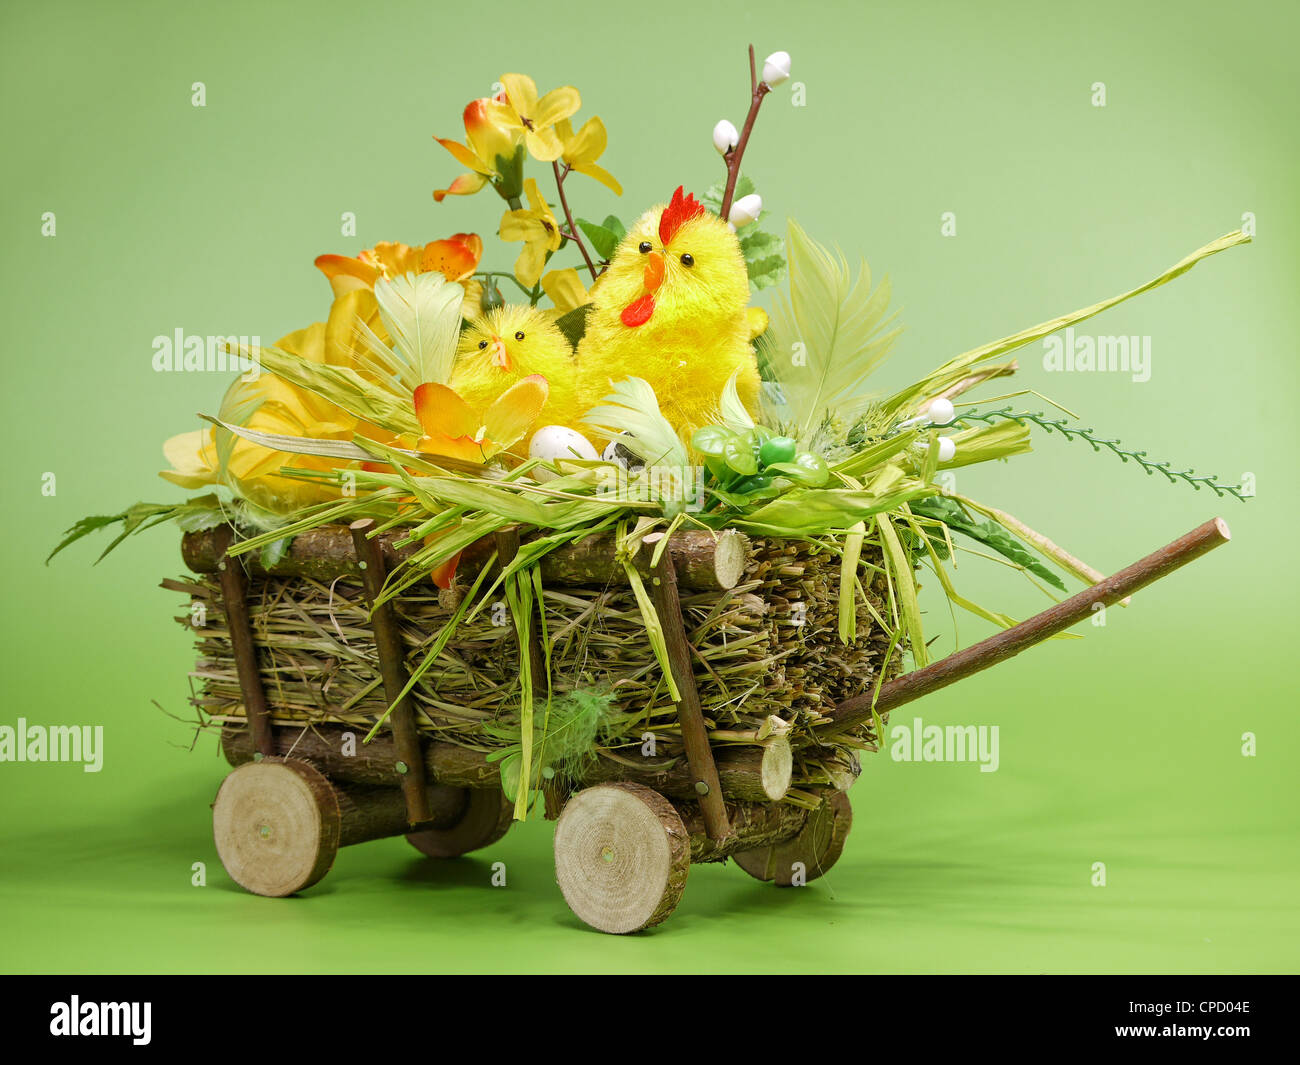 Wicker cart with Easter chickling and eggs over light green background Stock Photo